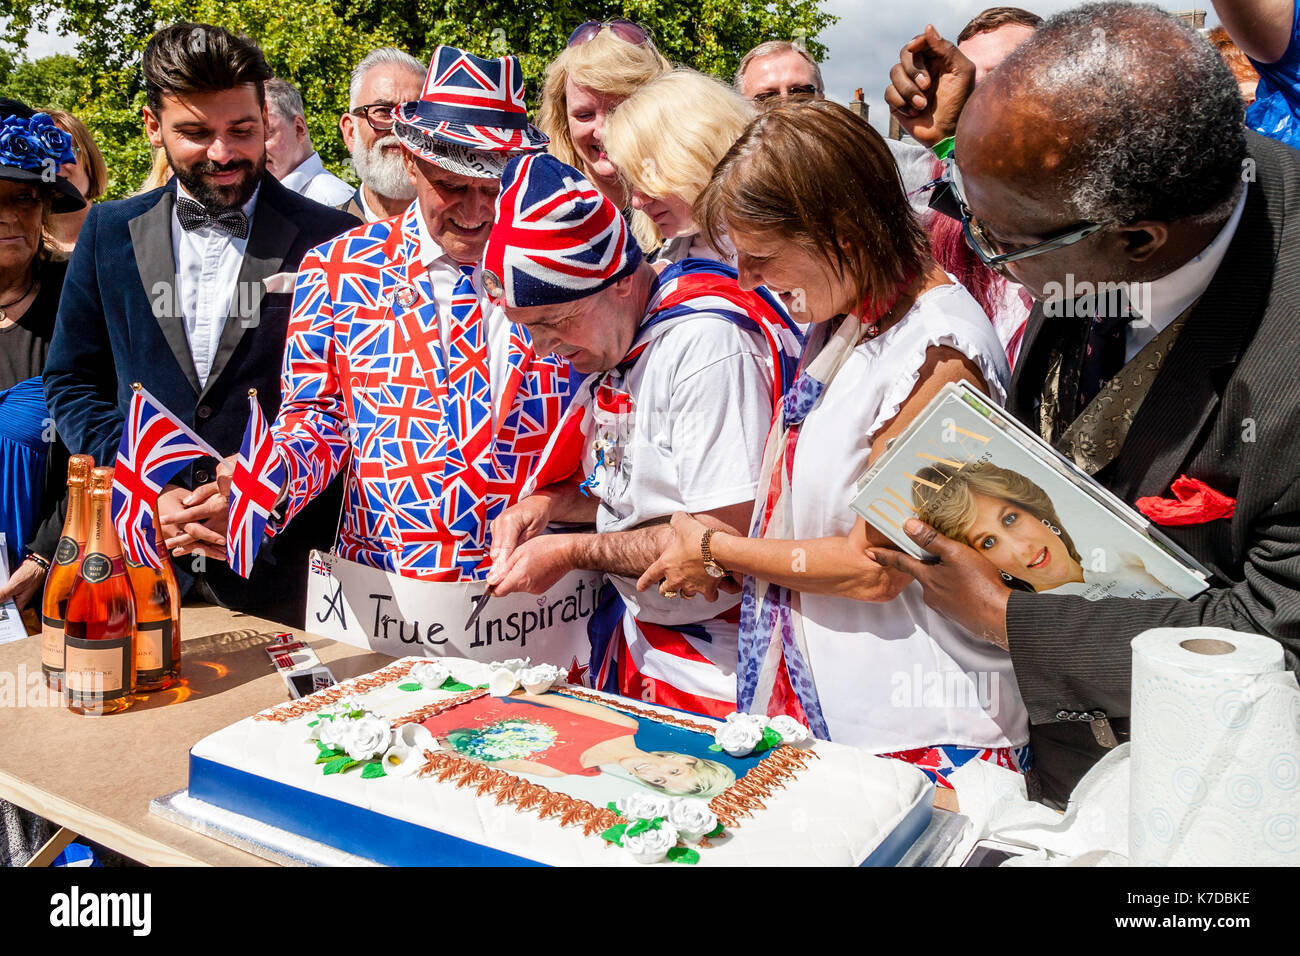 Supporters Of The Late Princess Diana Cutting A Large Cake In Memory Of Her On The 20th Anniversary Of Her Death, Kensington Palace, London, UK Stock Photo